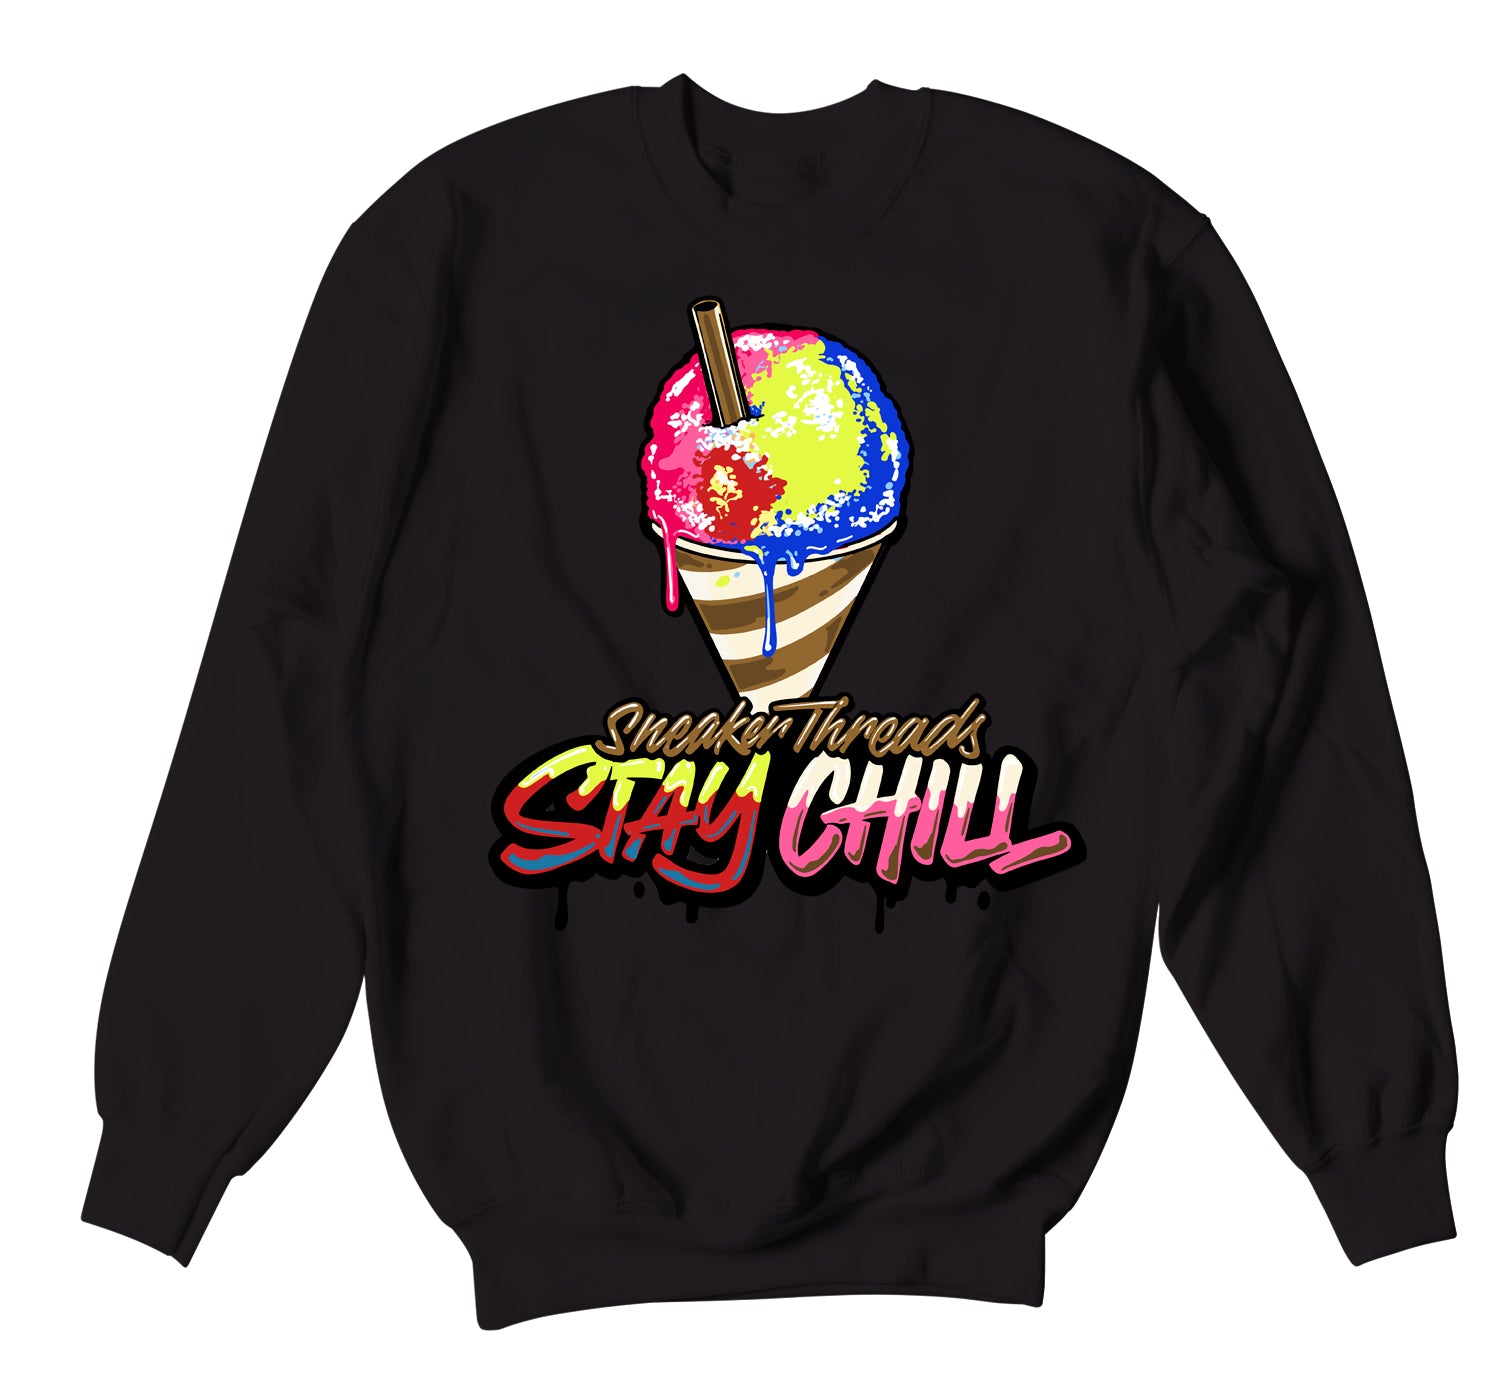 Retro 4 Wild Things Sweater - Stay Chill - Black